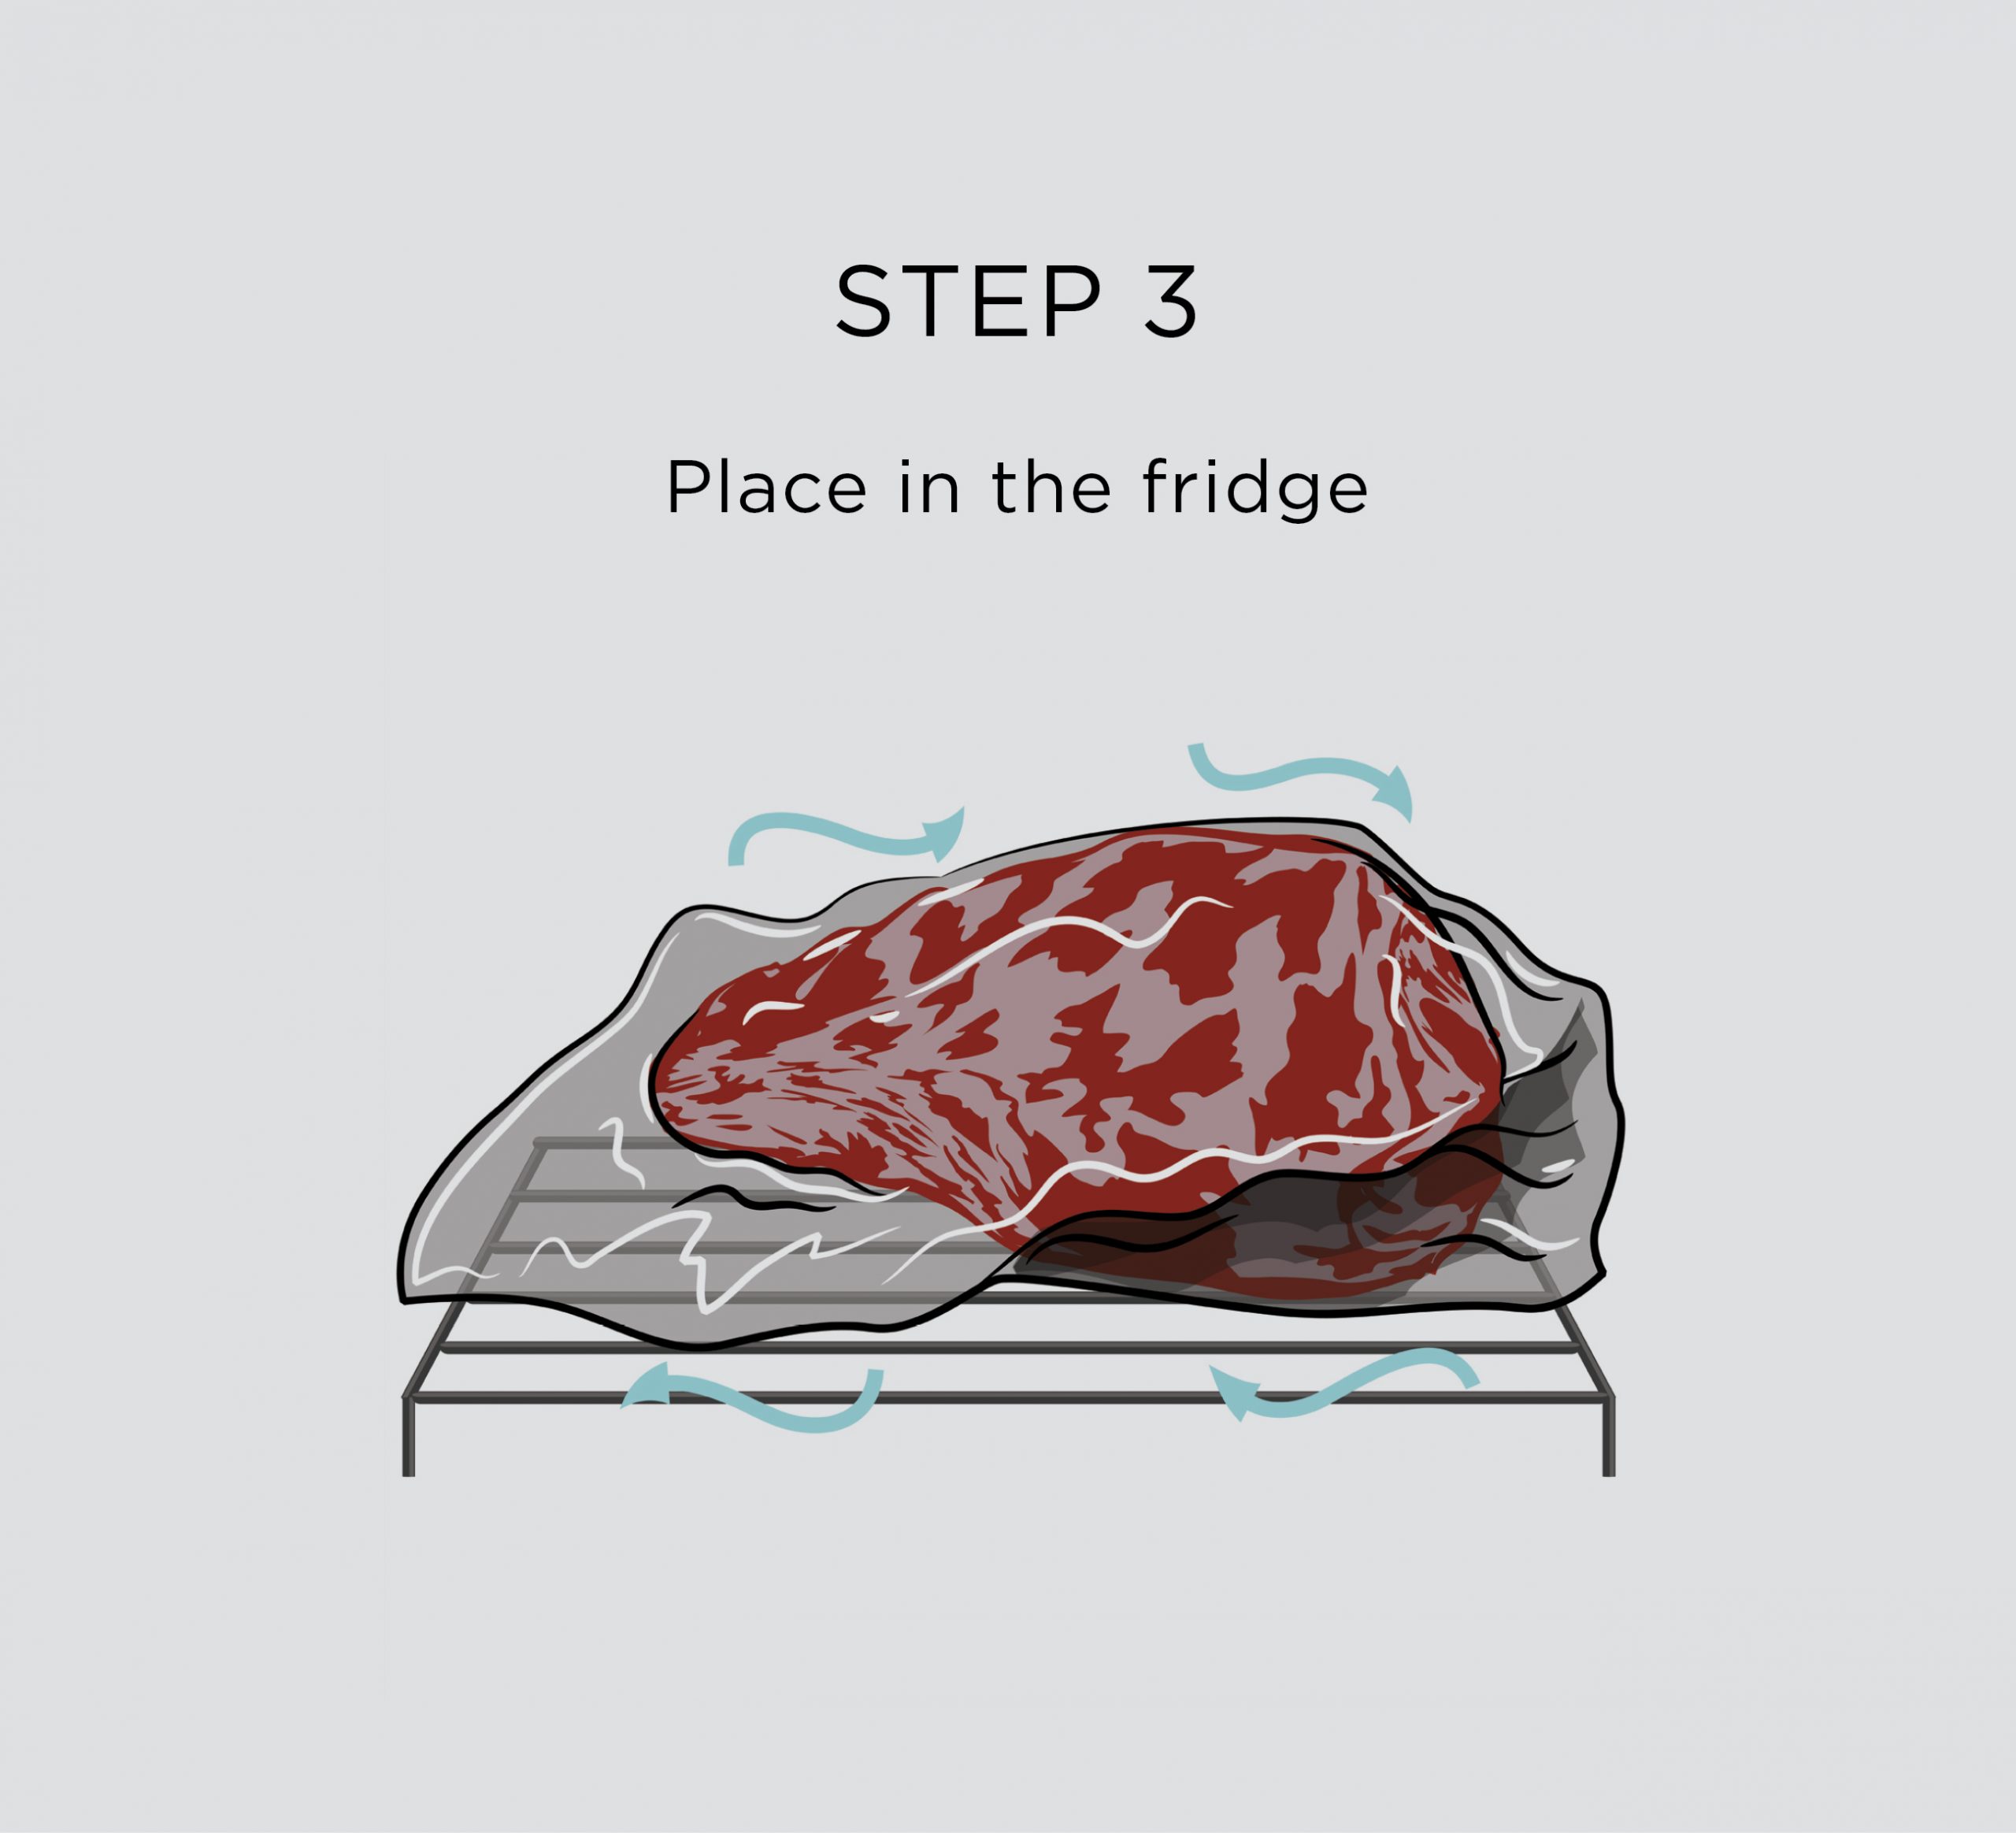 Step 3: Place in the Fridge